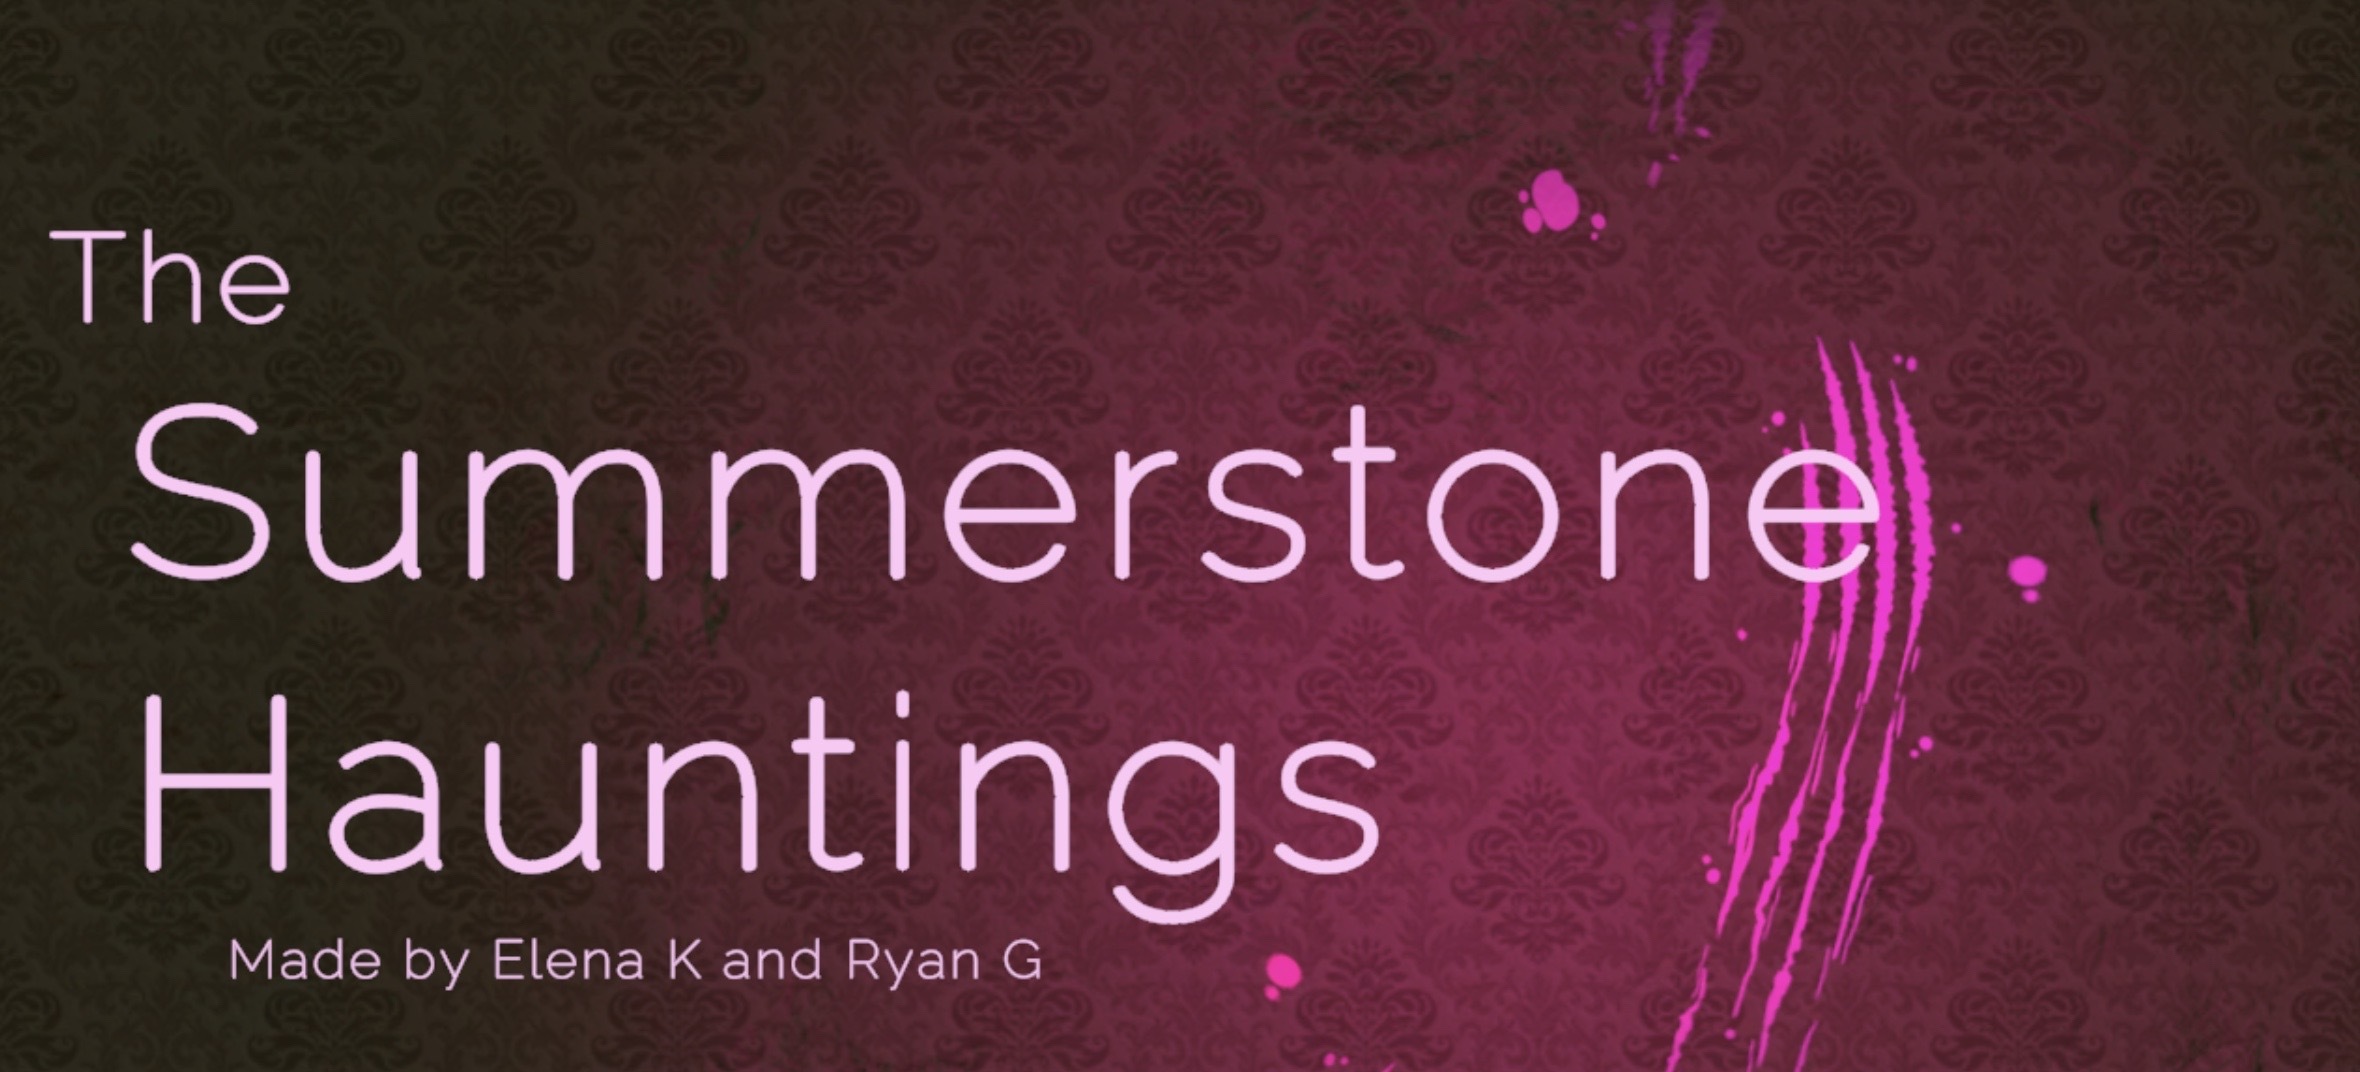 The Summerstone Hauntings